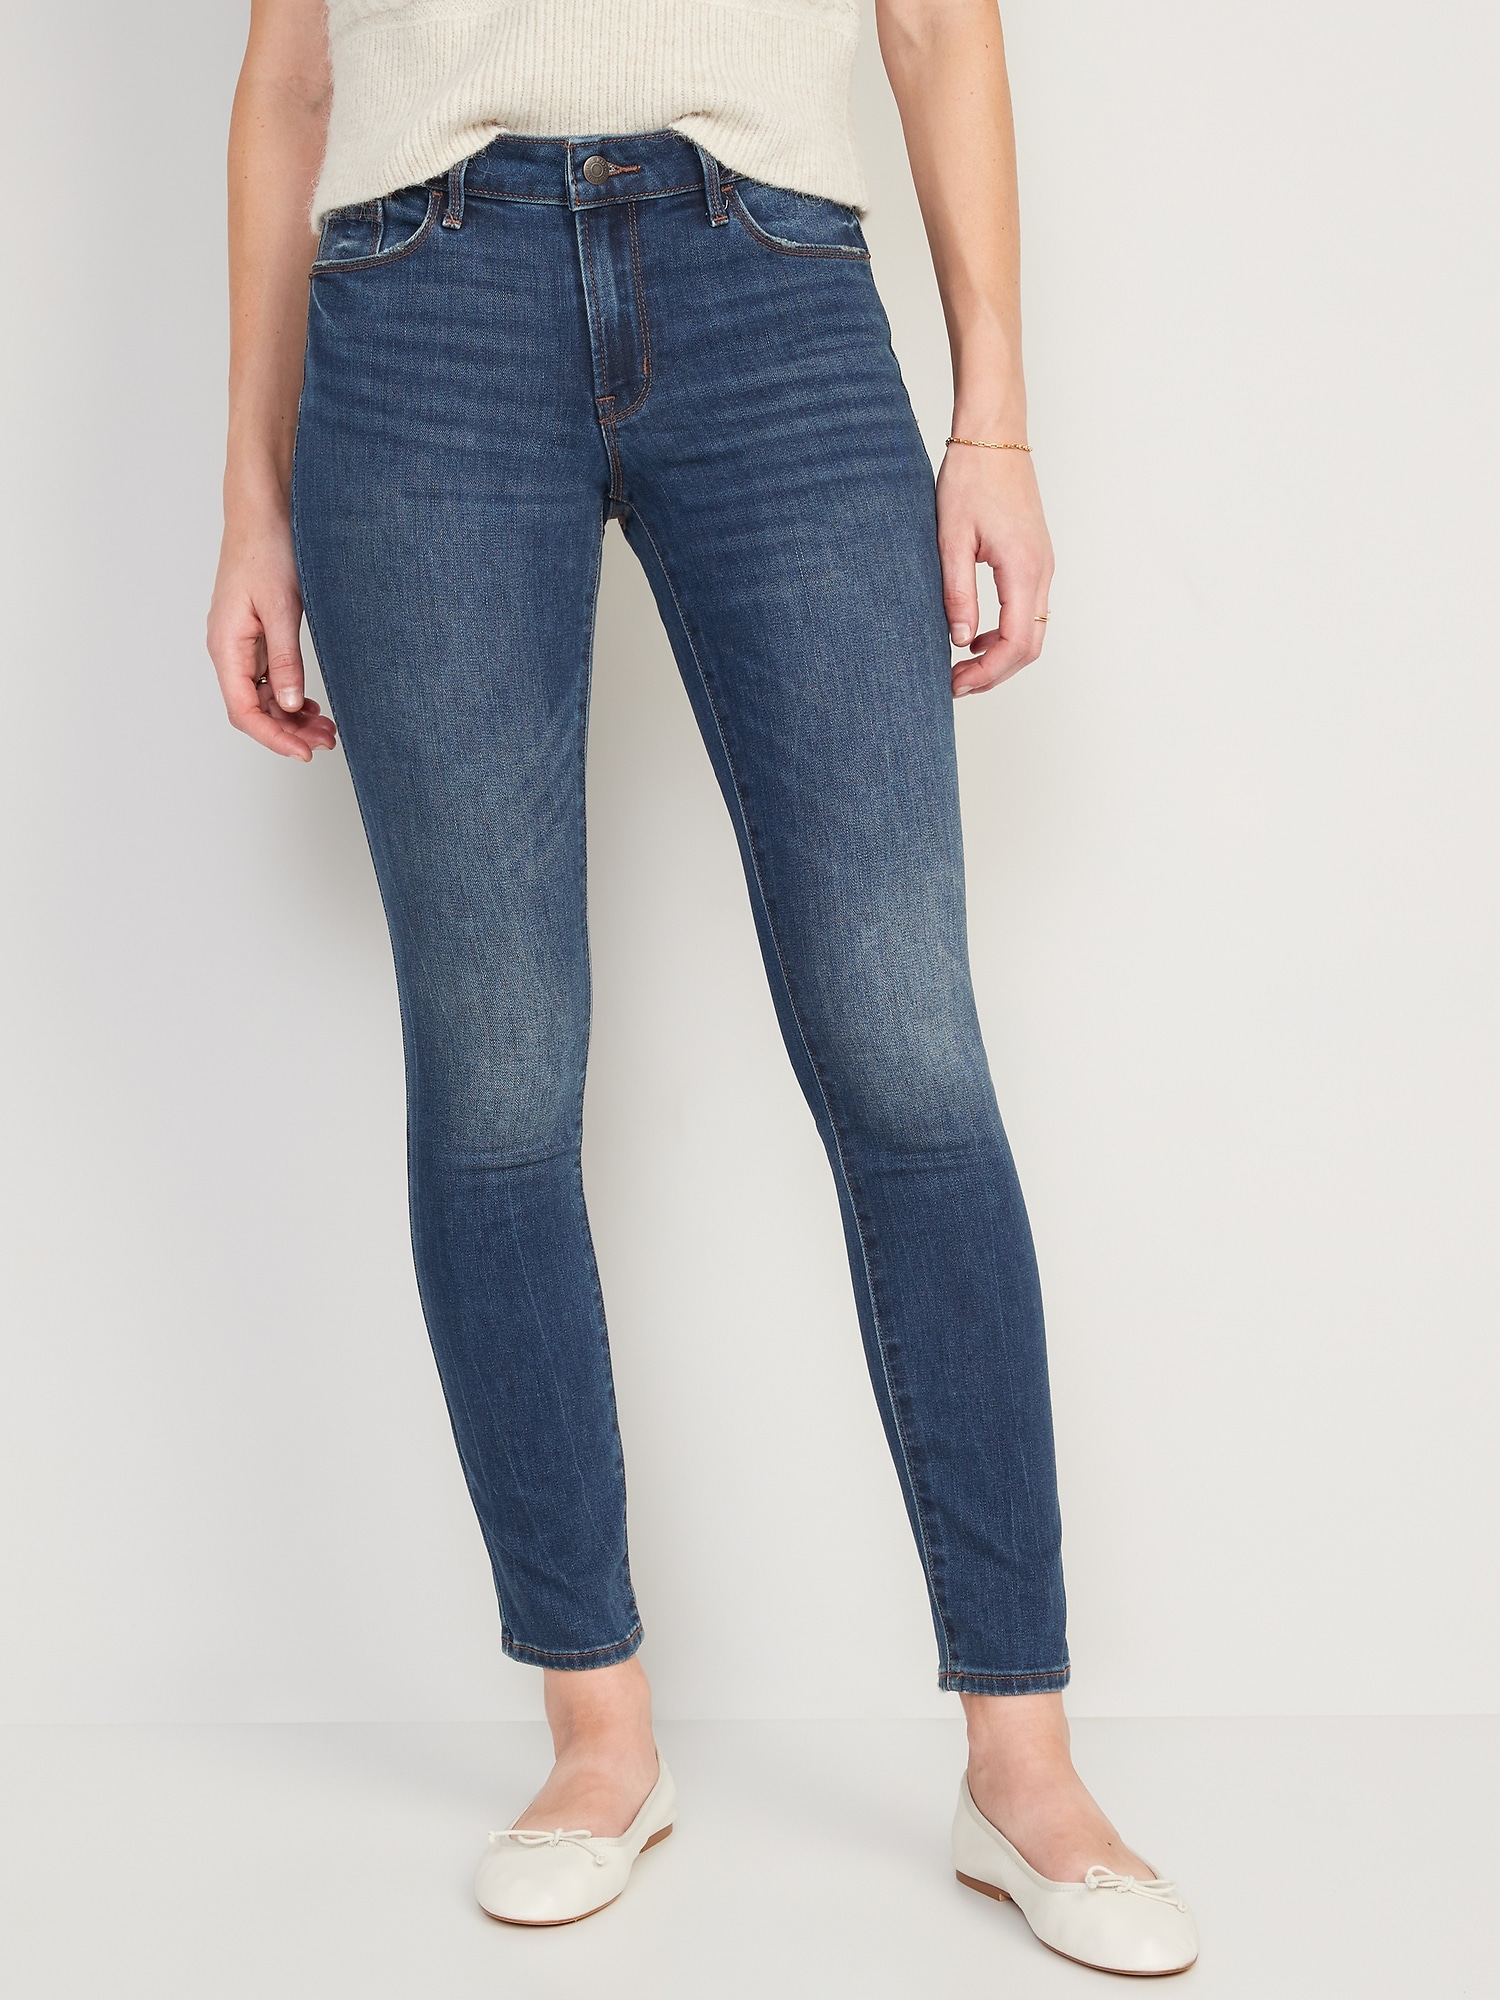 Mid-Rise Pop Icon Skinny Jeans for Women Old Navy